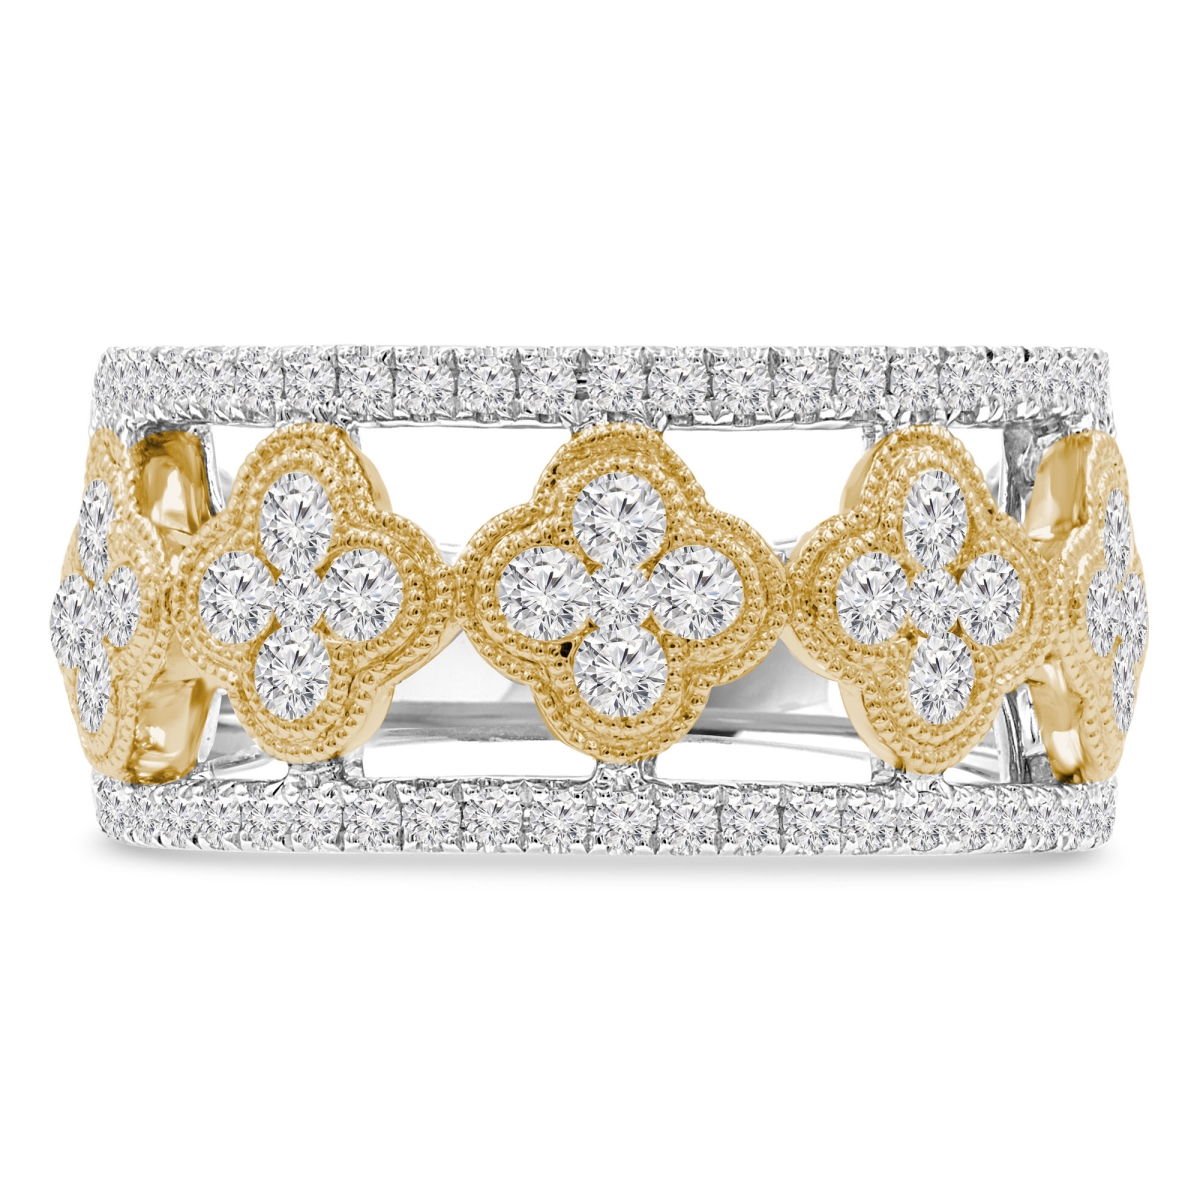 Picture of Majesty Diamonds MDR210140-5.5 1 CTW Round Diamond Cocktail Ring in 14K Two-Tone Gold - Size 5.5